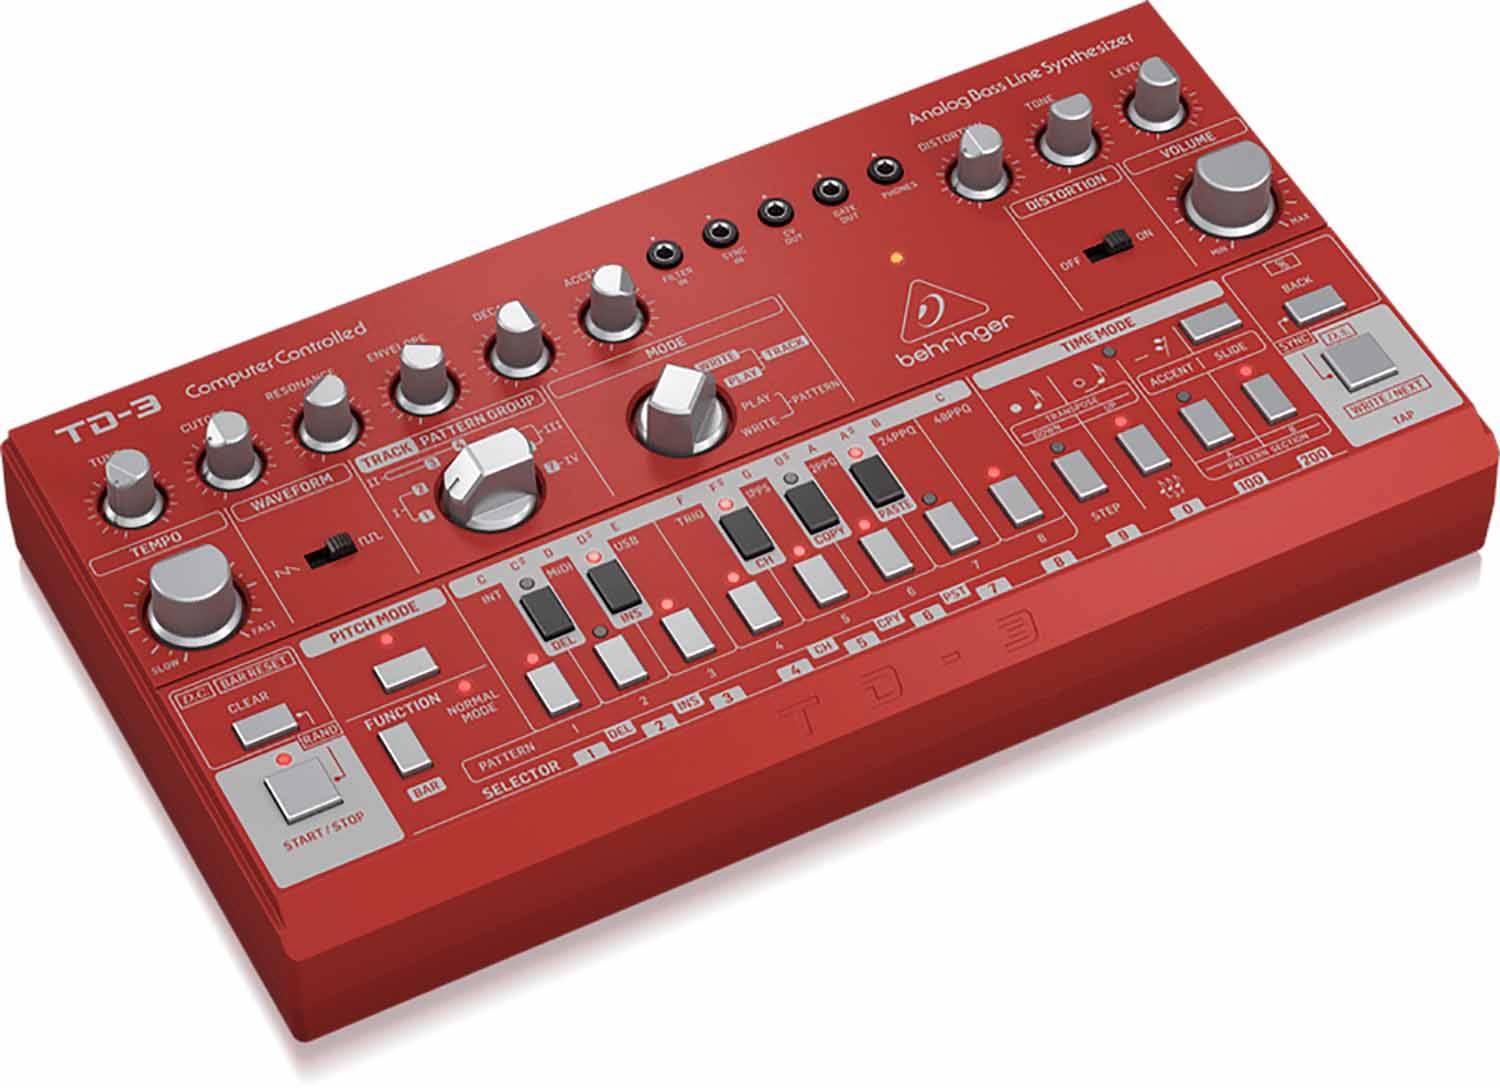 Behringer TD-3-RD Analog Bass Line Synthesizer With VCO, VCF And 16-Step Sequencer - Red - Hollywood DJ